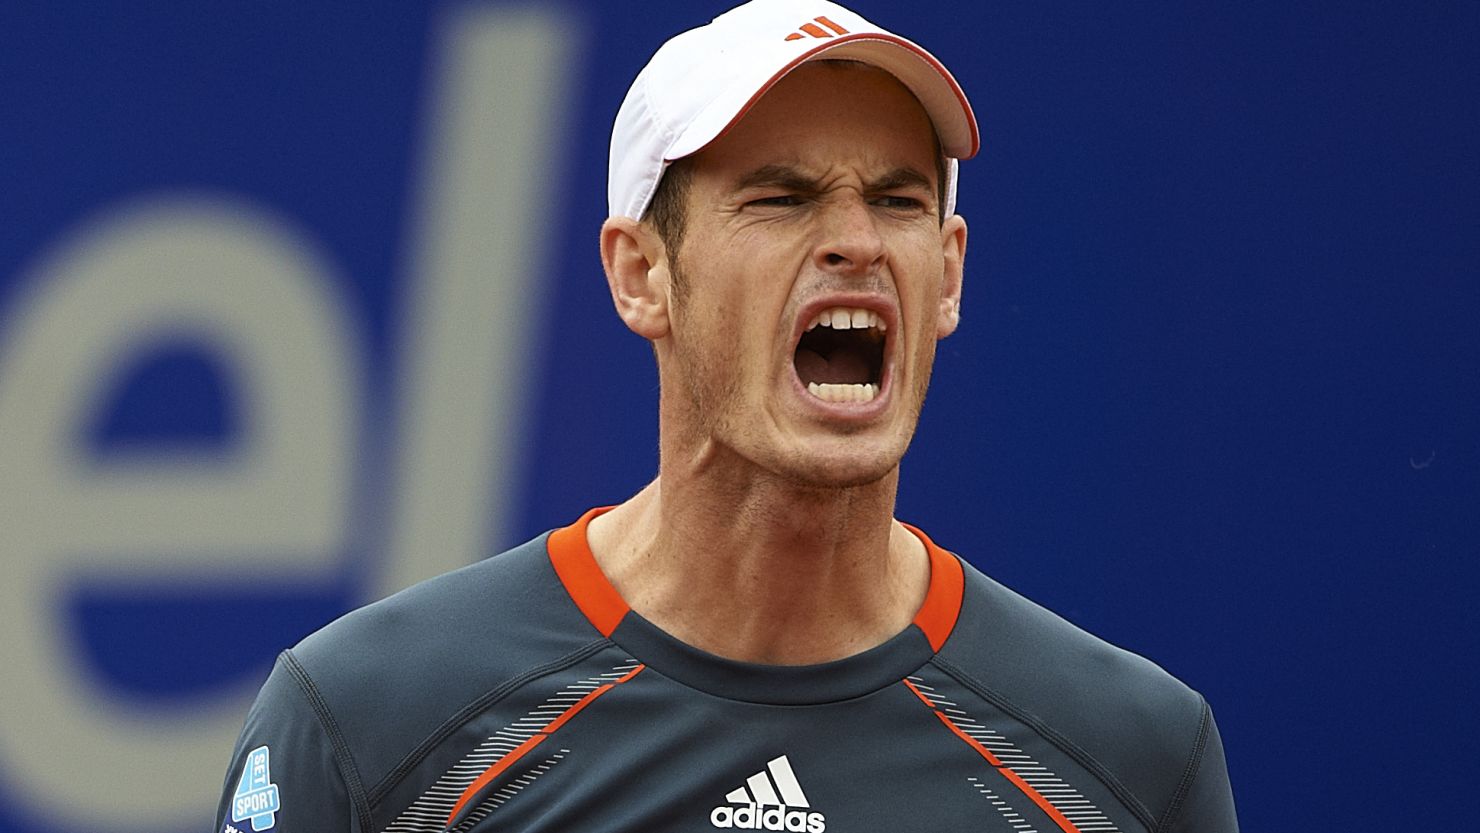 Andy Murray has suffered a series of disappointments in this year's clay court season.